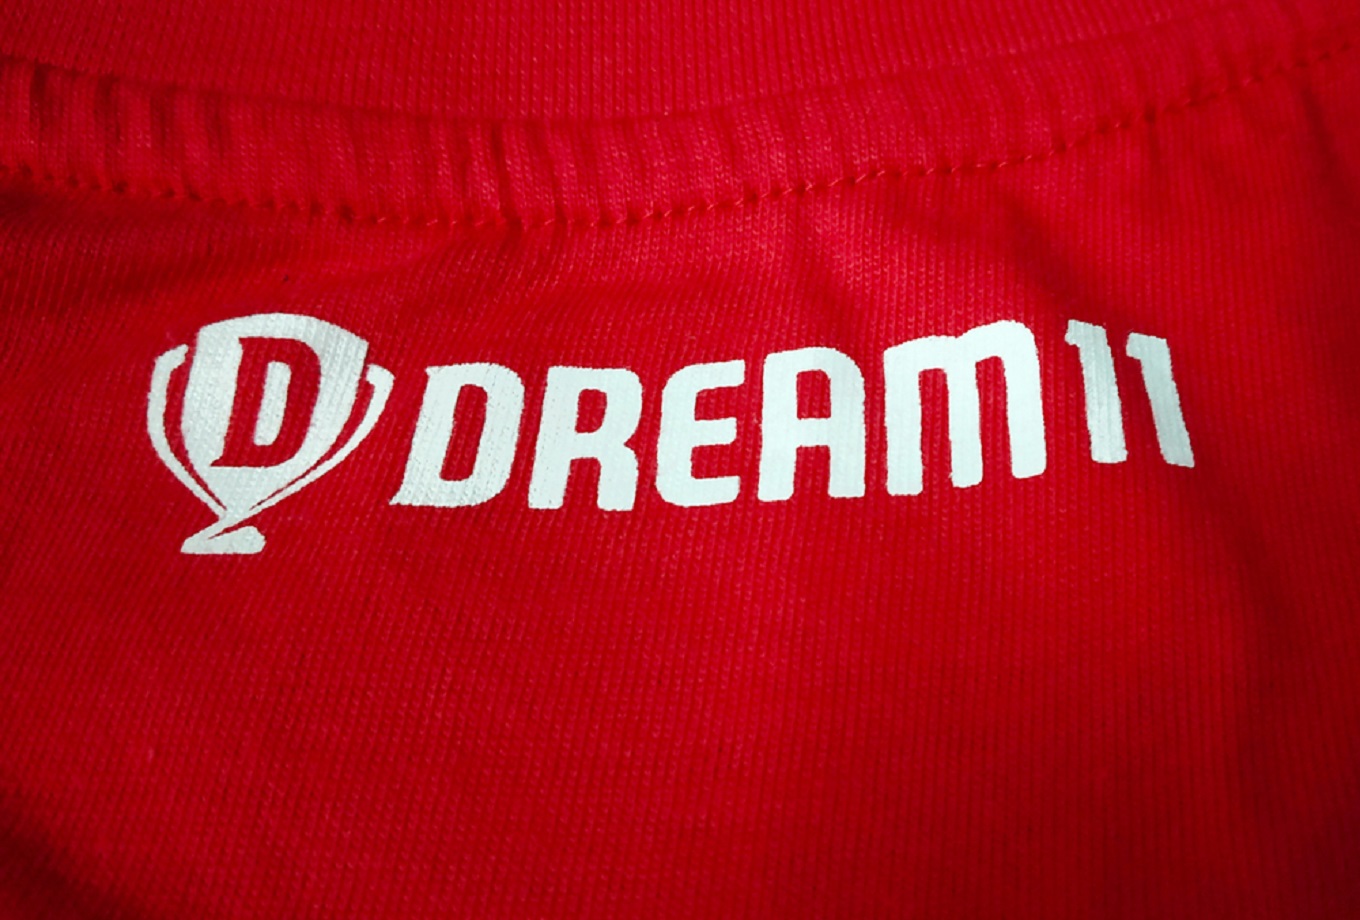 Exclusive: Dream11 Parent Sporta Technologies To Raise INR 90 Cr In New Round